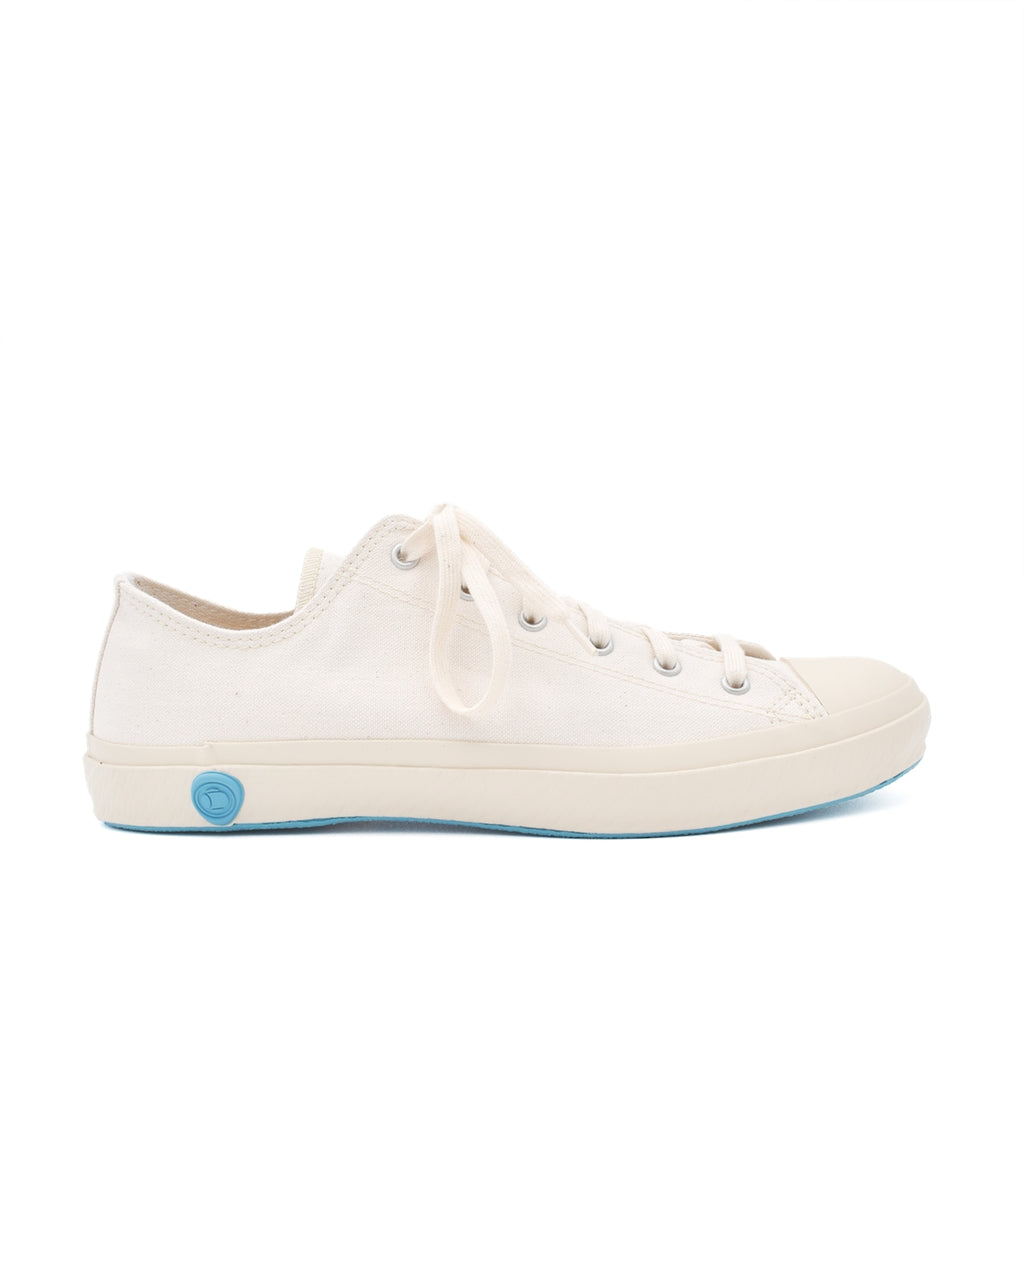 Shoes Like Pottery White Low Top Sneaker